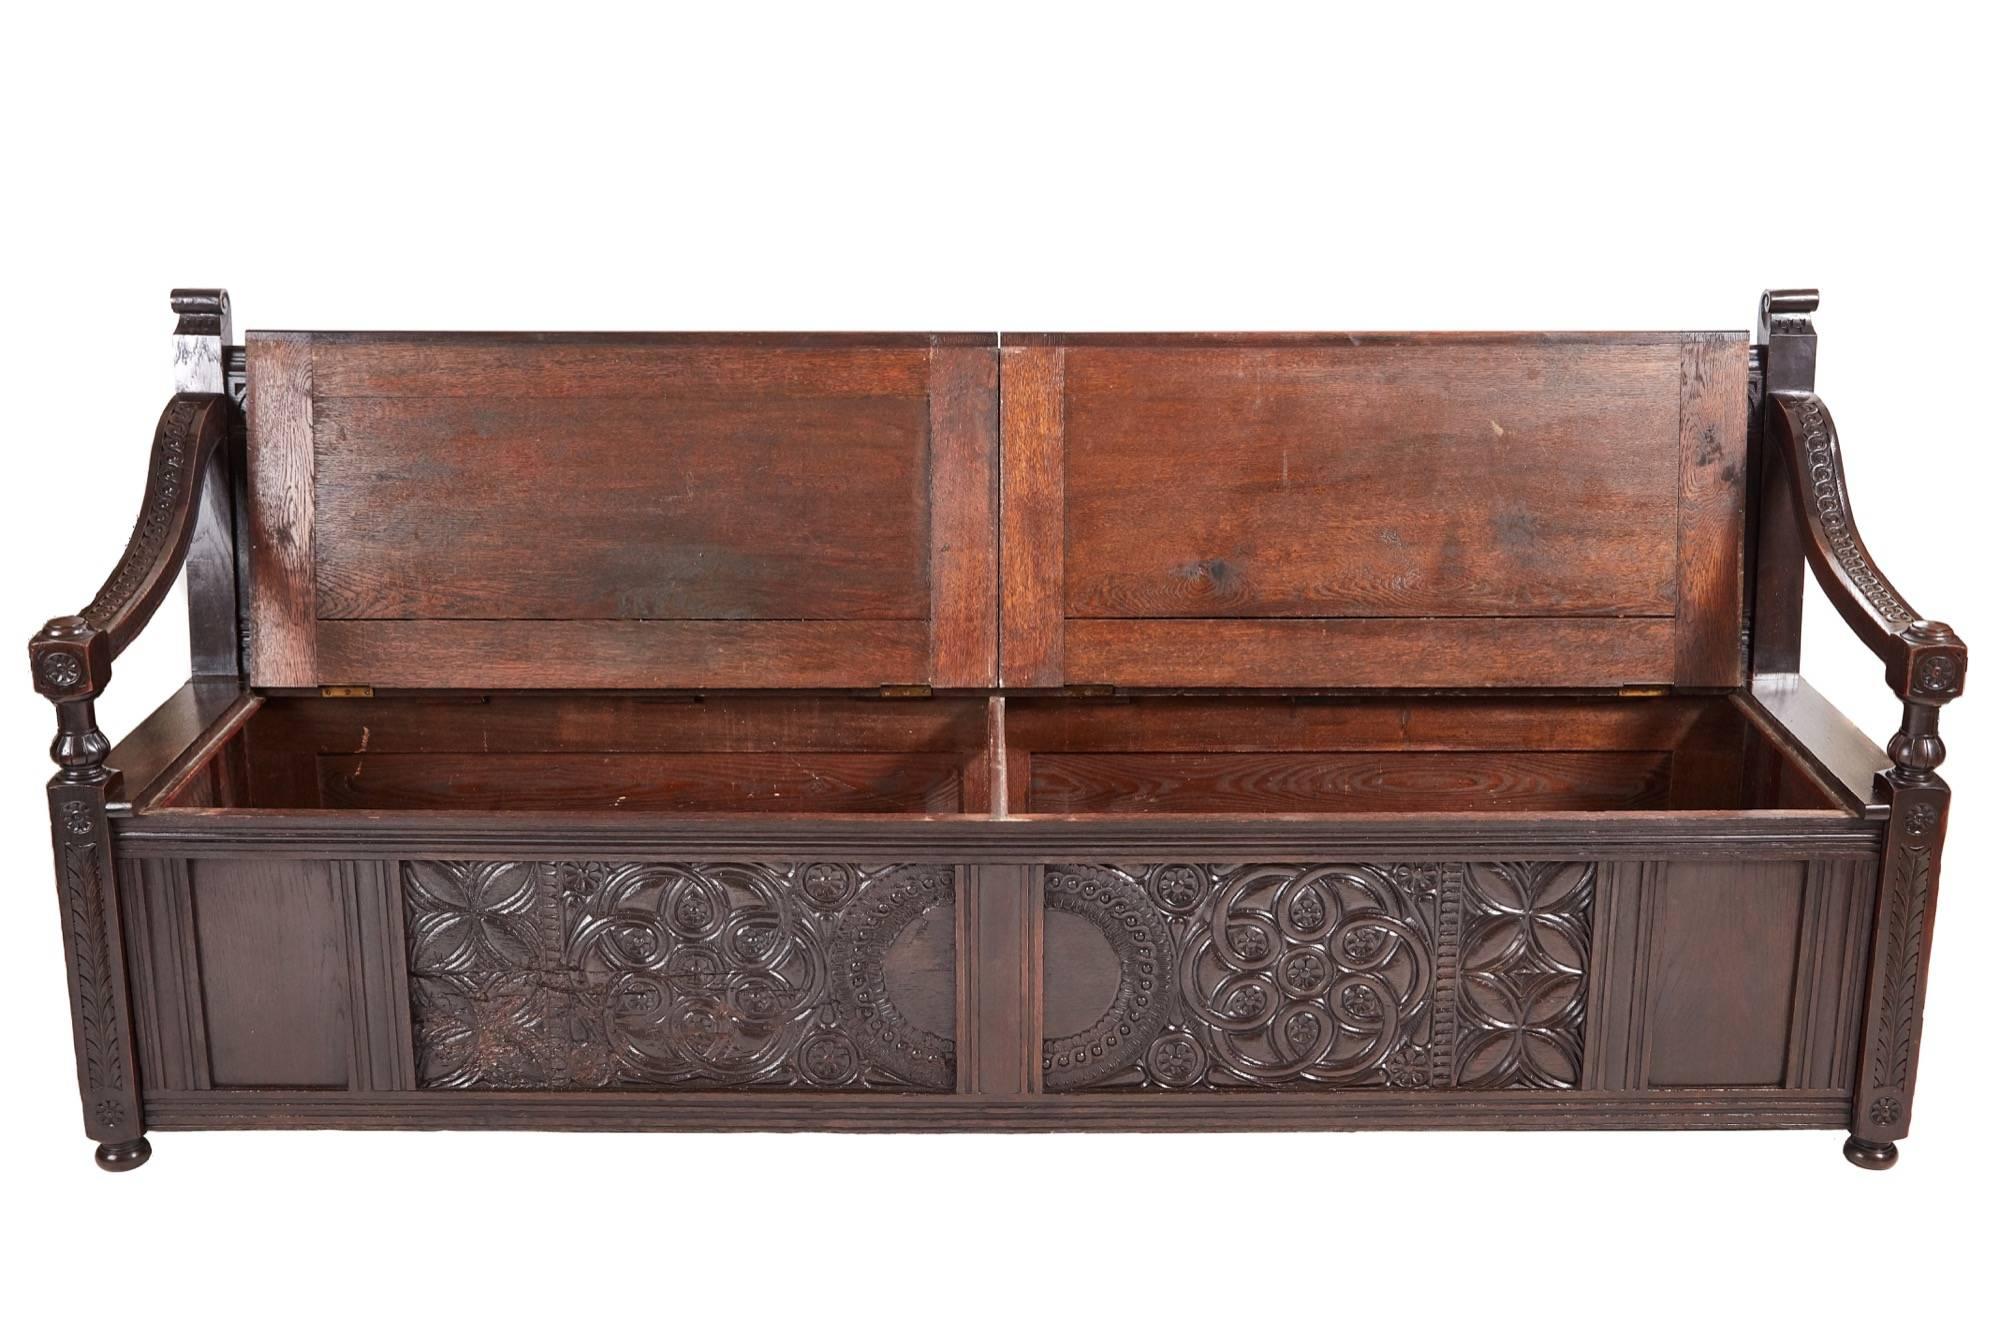 fantastic antique large carved oak storage settle, with three fantastic carved panels to the back, shaped carved arms, two lift up storage seats, two large carved panels to the front, lovely carved ends, standing on short turned feet
Fantastic